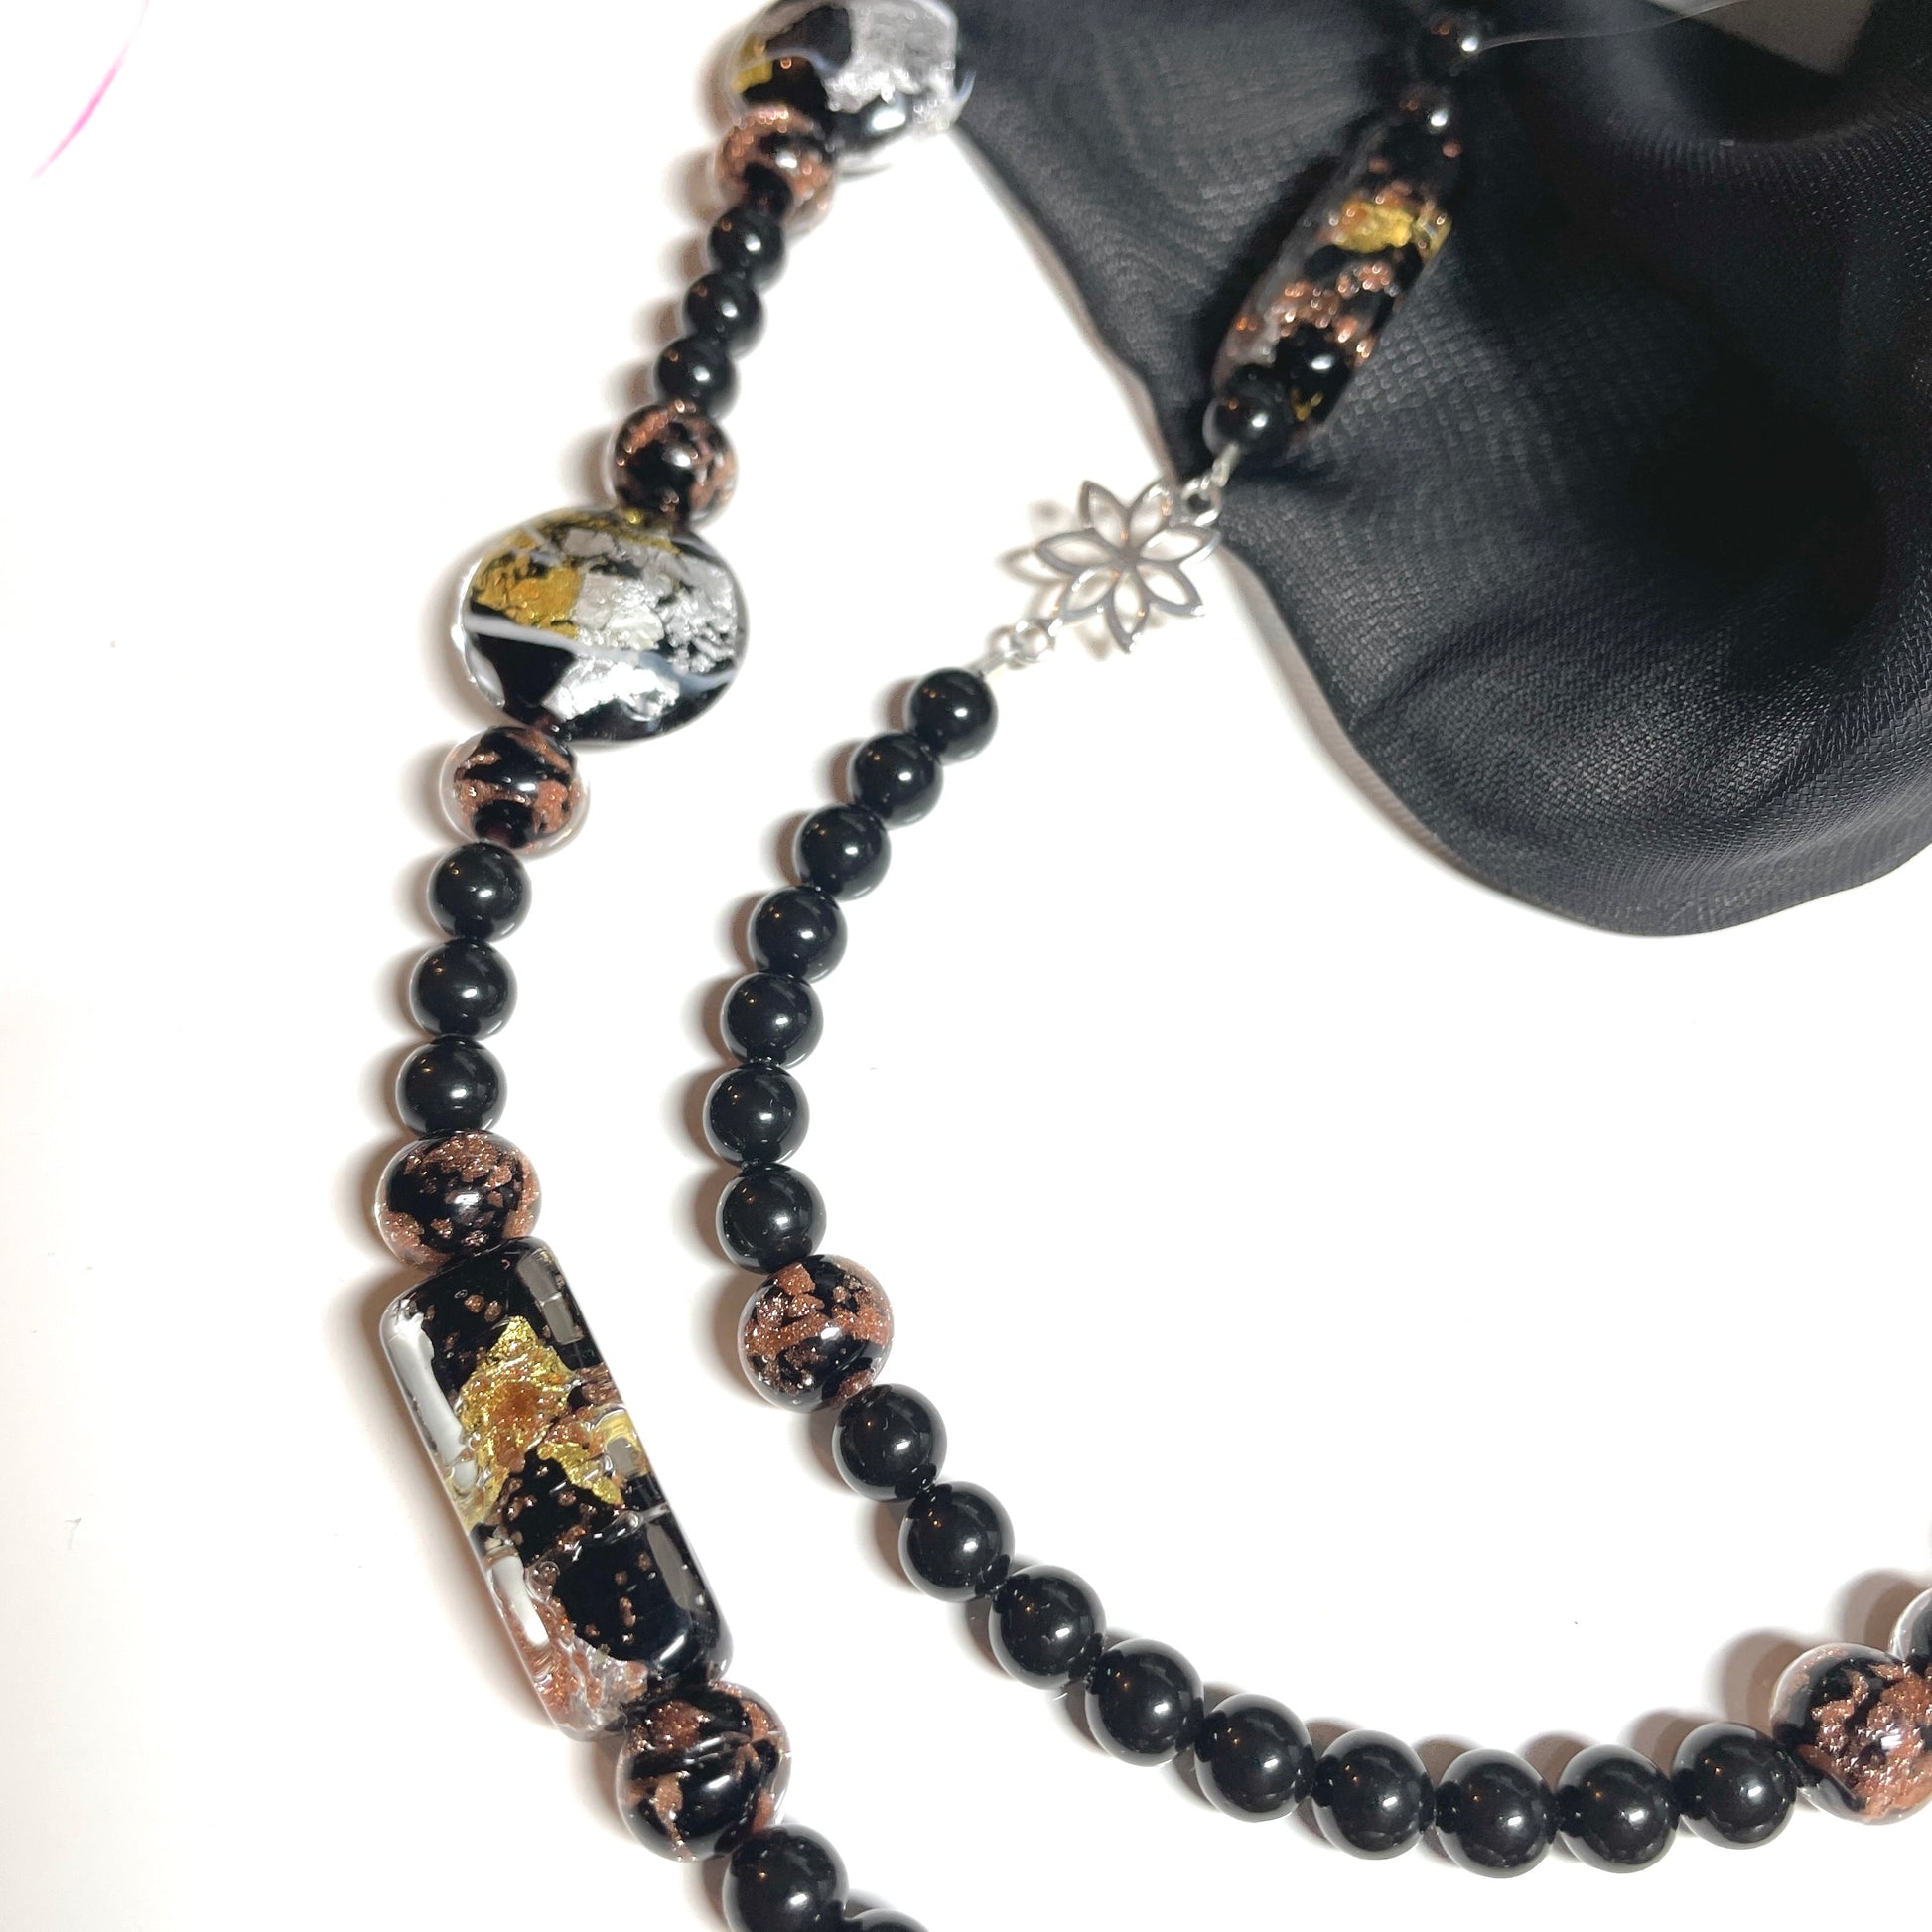 Black and gold leaf beaded necklace